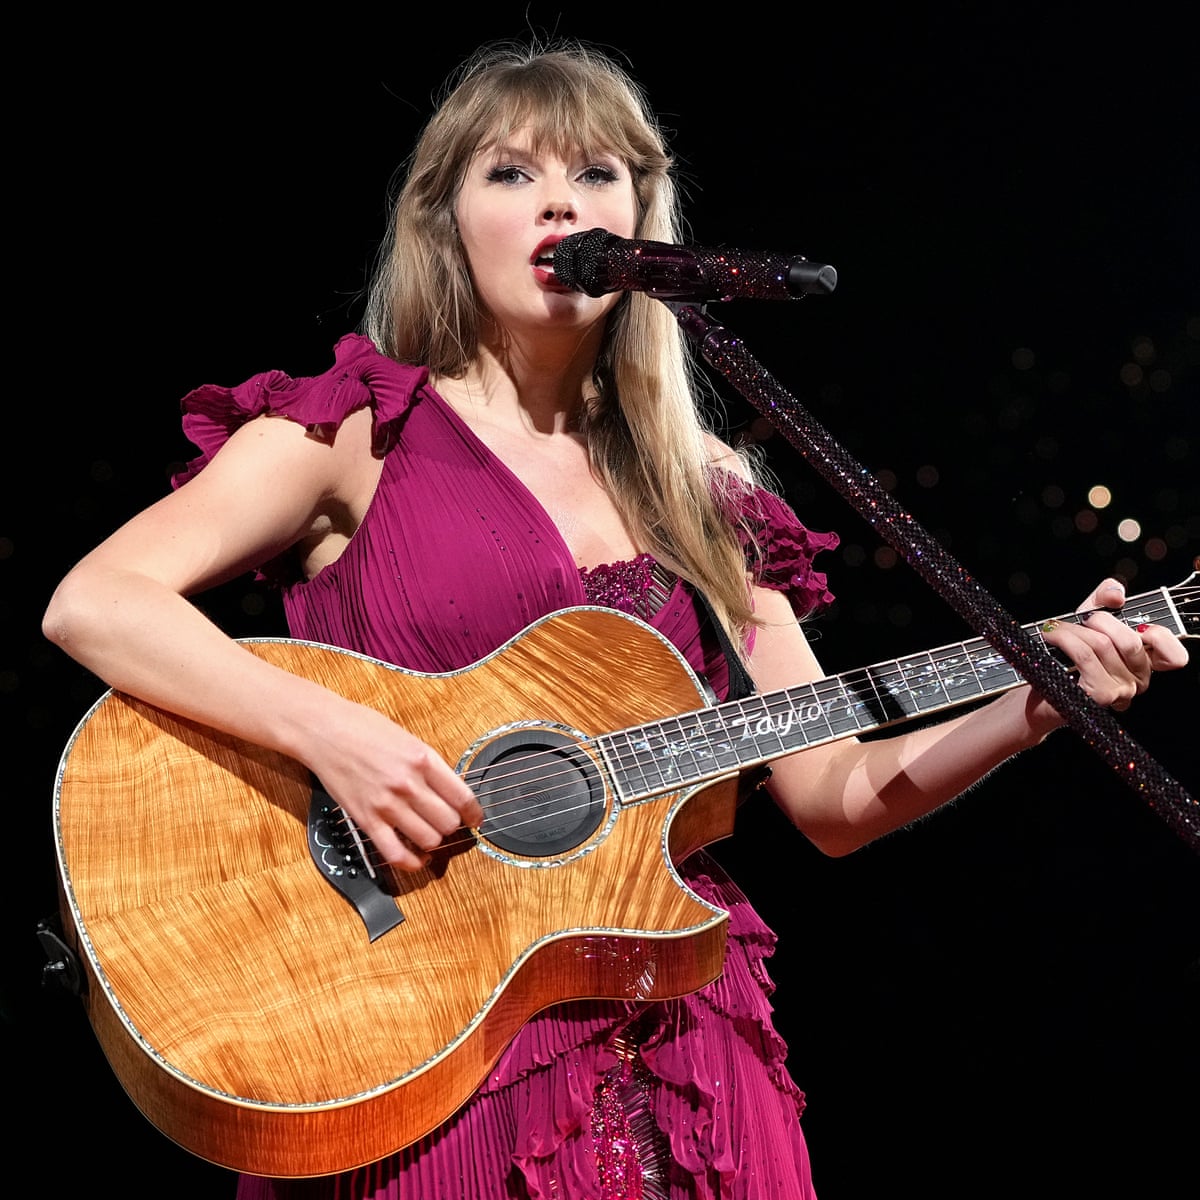 Another Green Dress? We Know Exactly What Taylor Swift Is Trying to Tell Us